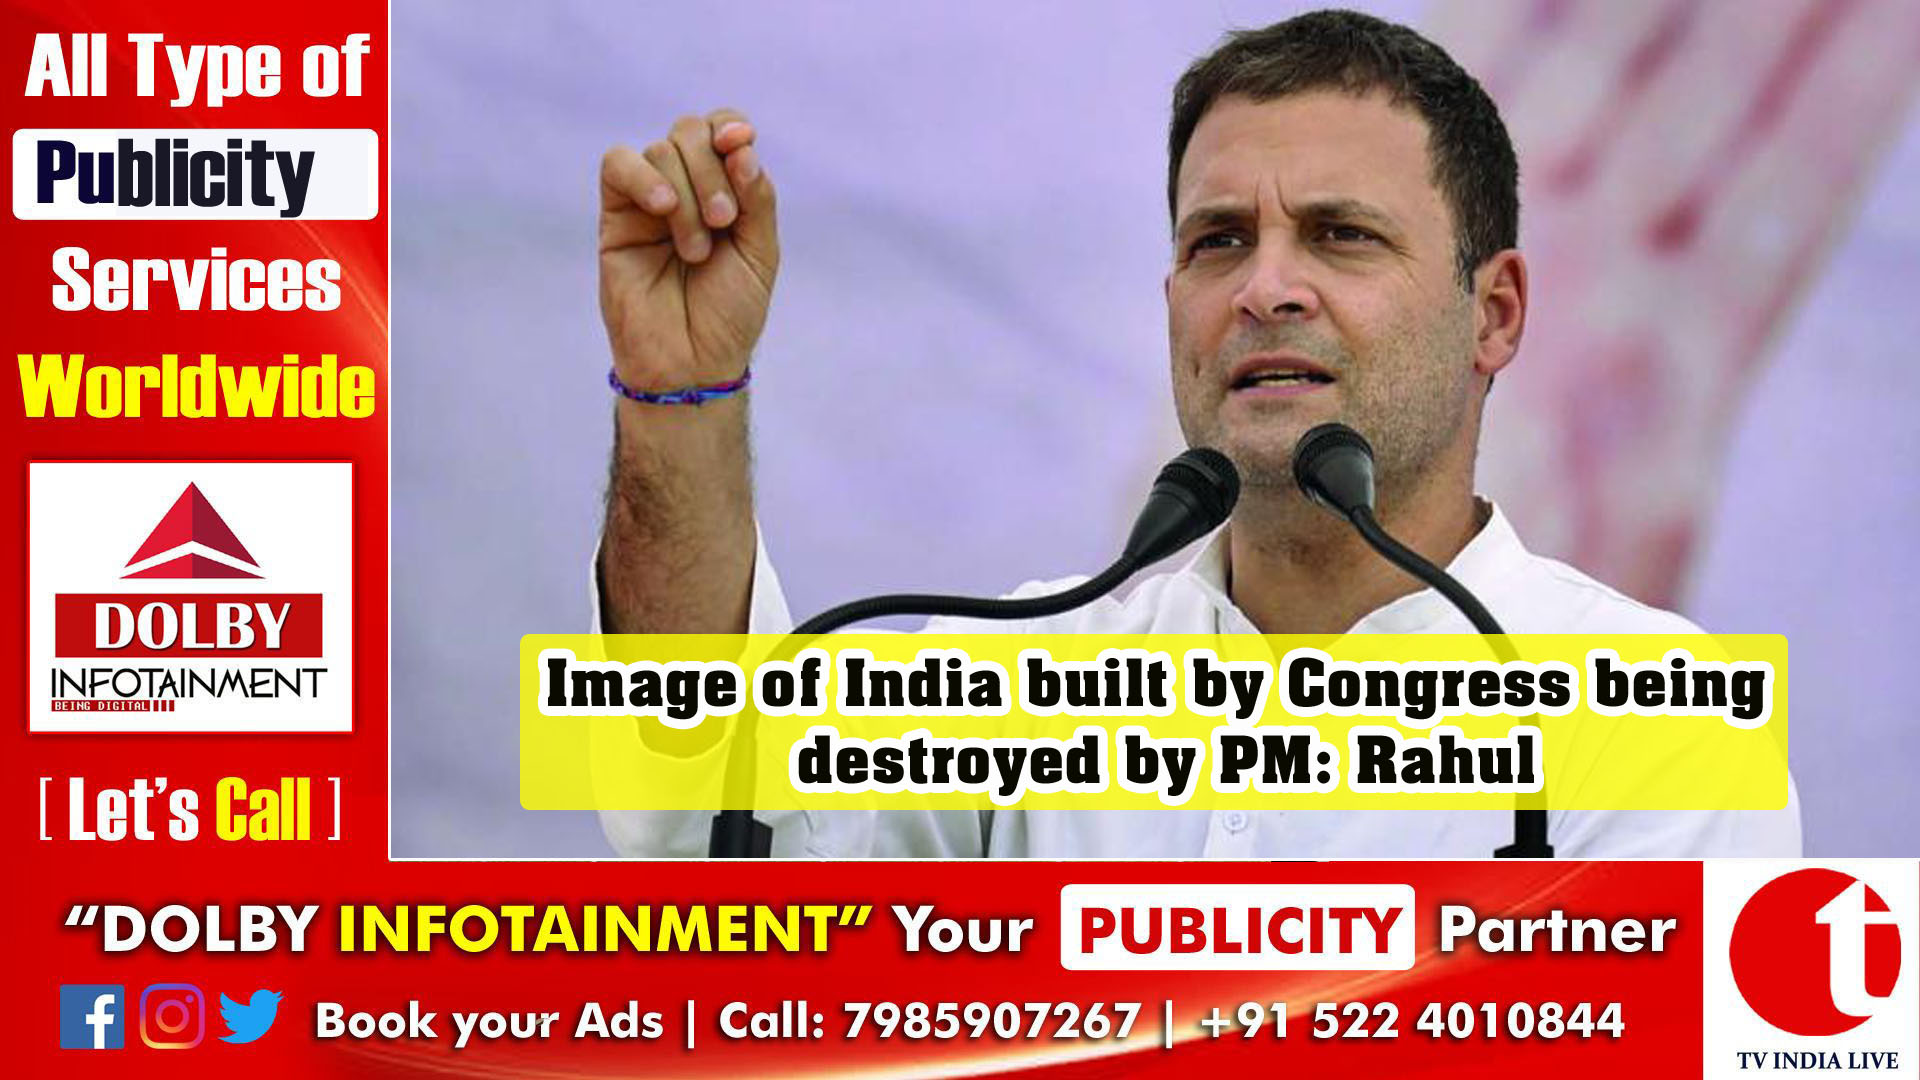 Image of India built by Congress being destroyed by PM: Rahul